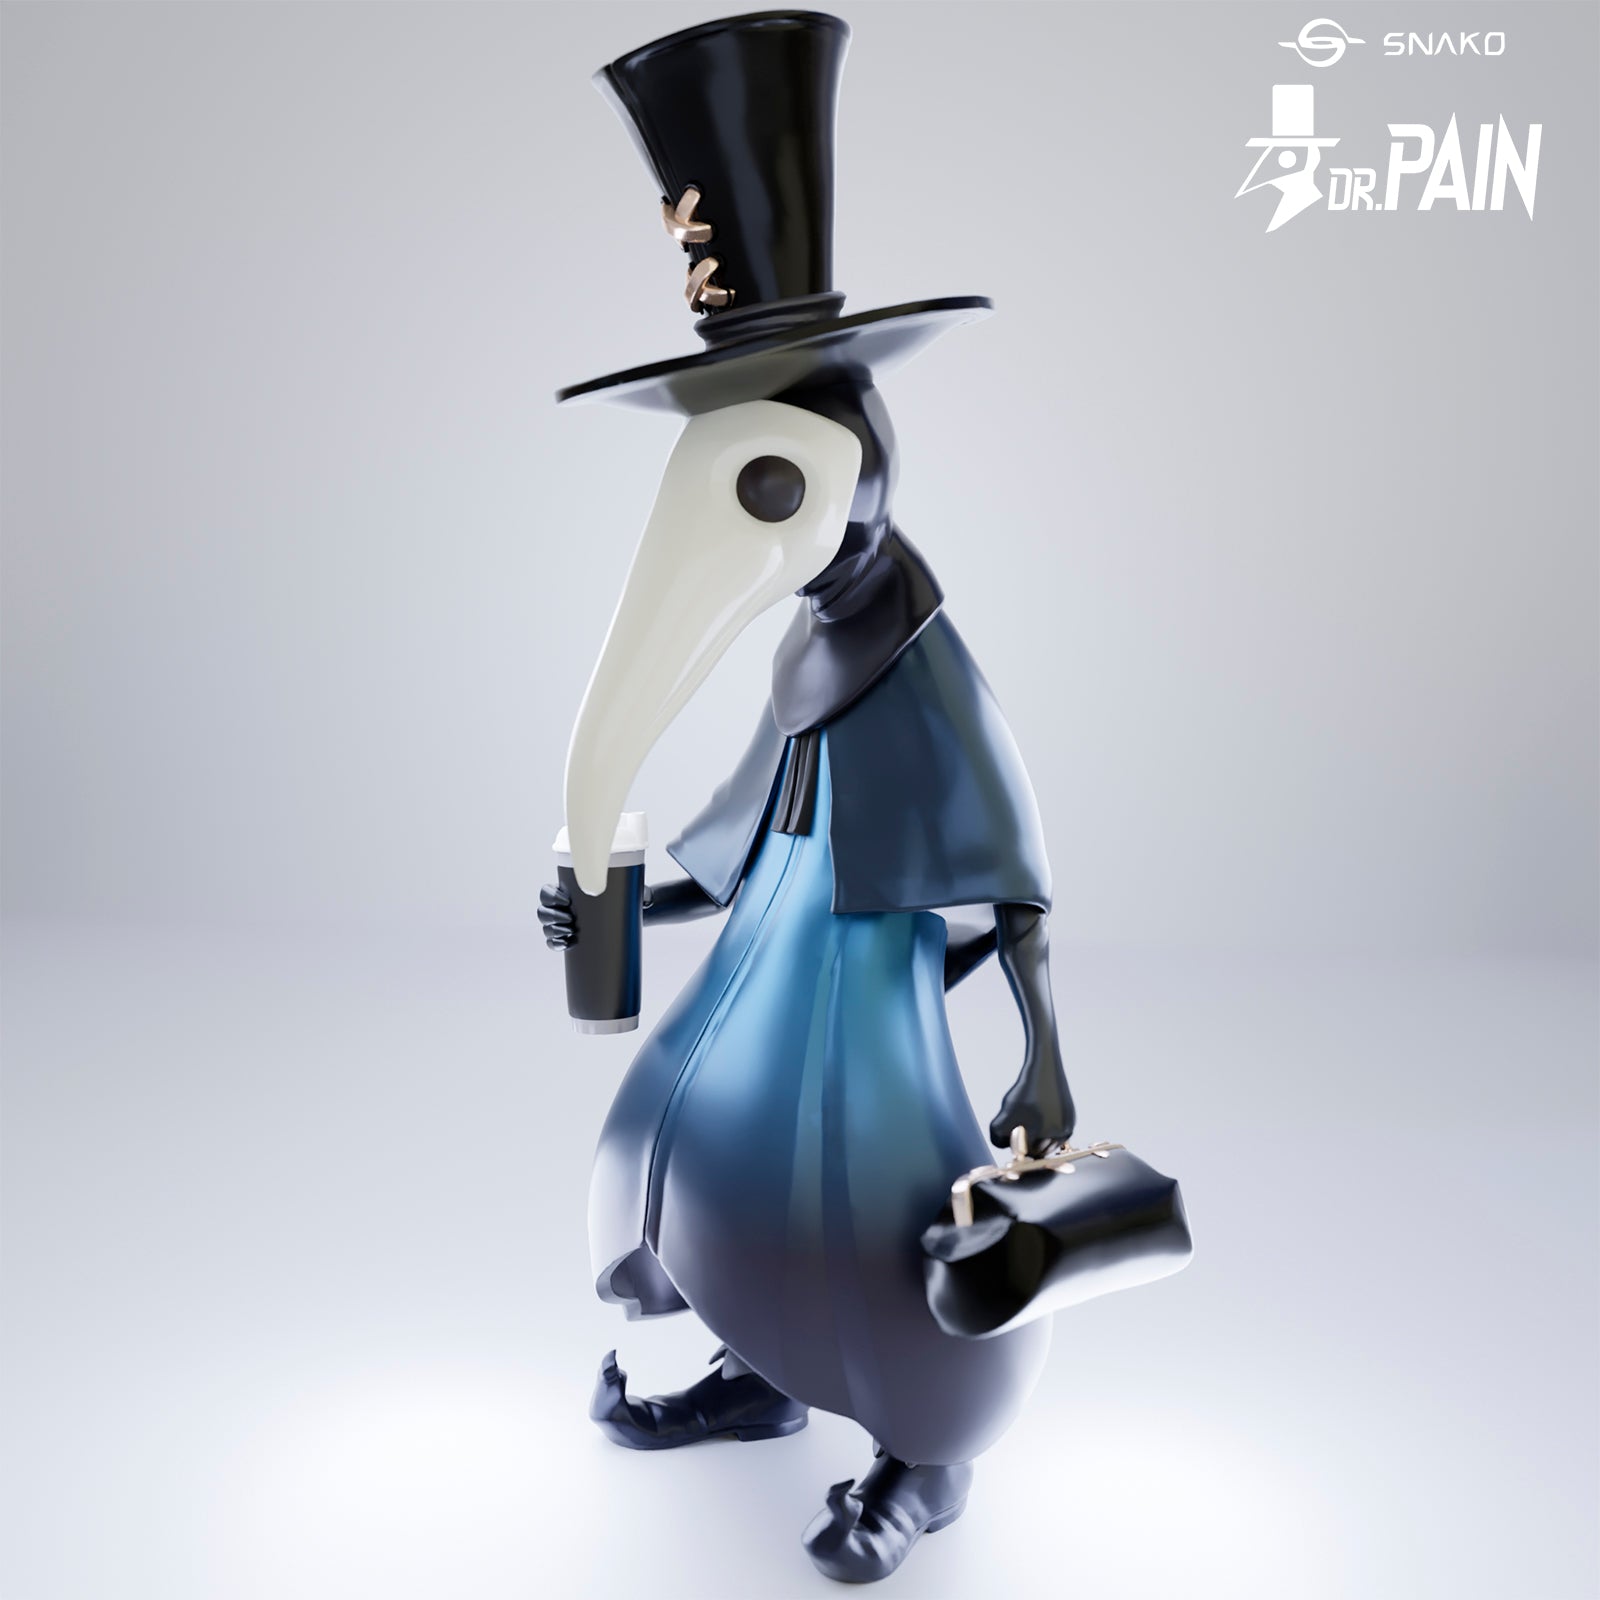 Dr. Pain Original Color Edition 30cm figure by Snako Productions Available Now